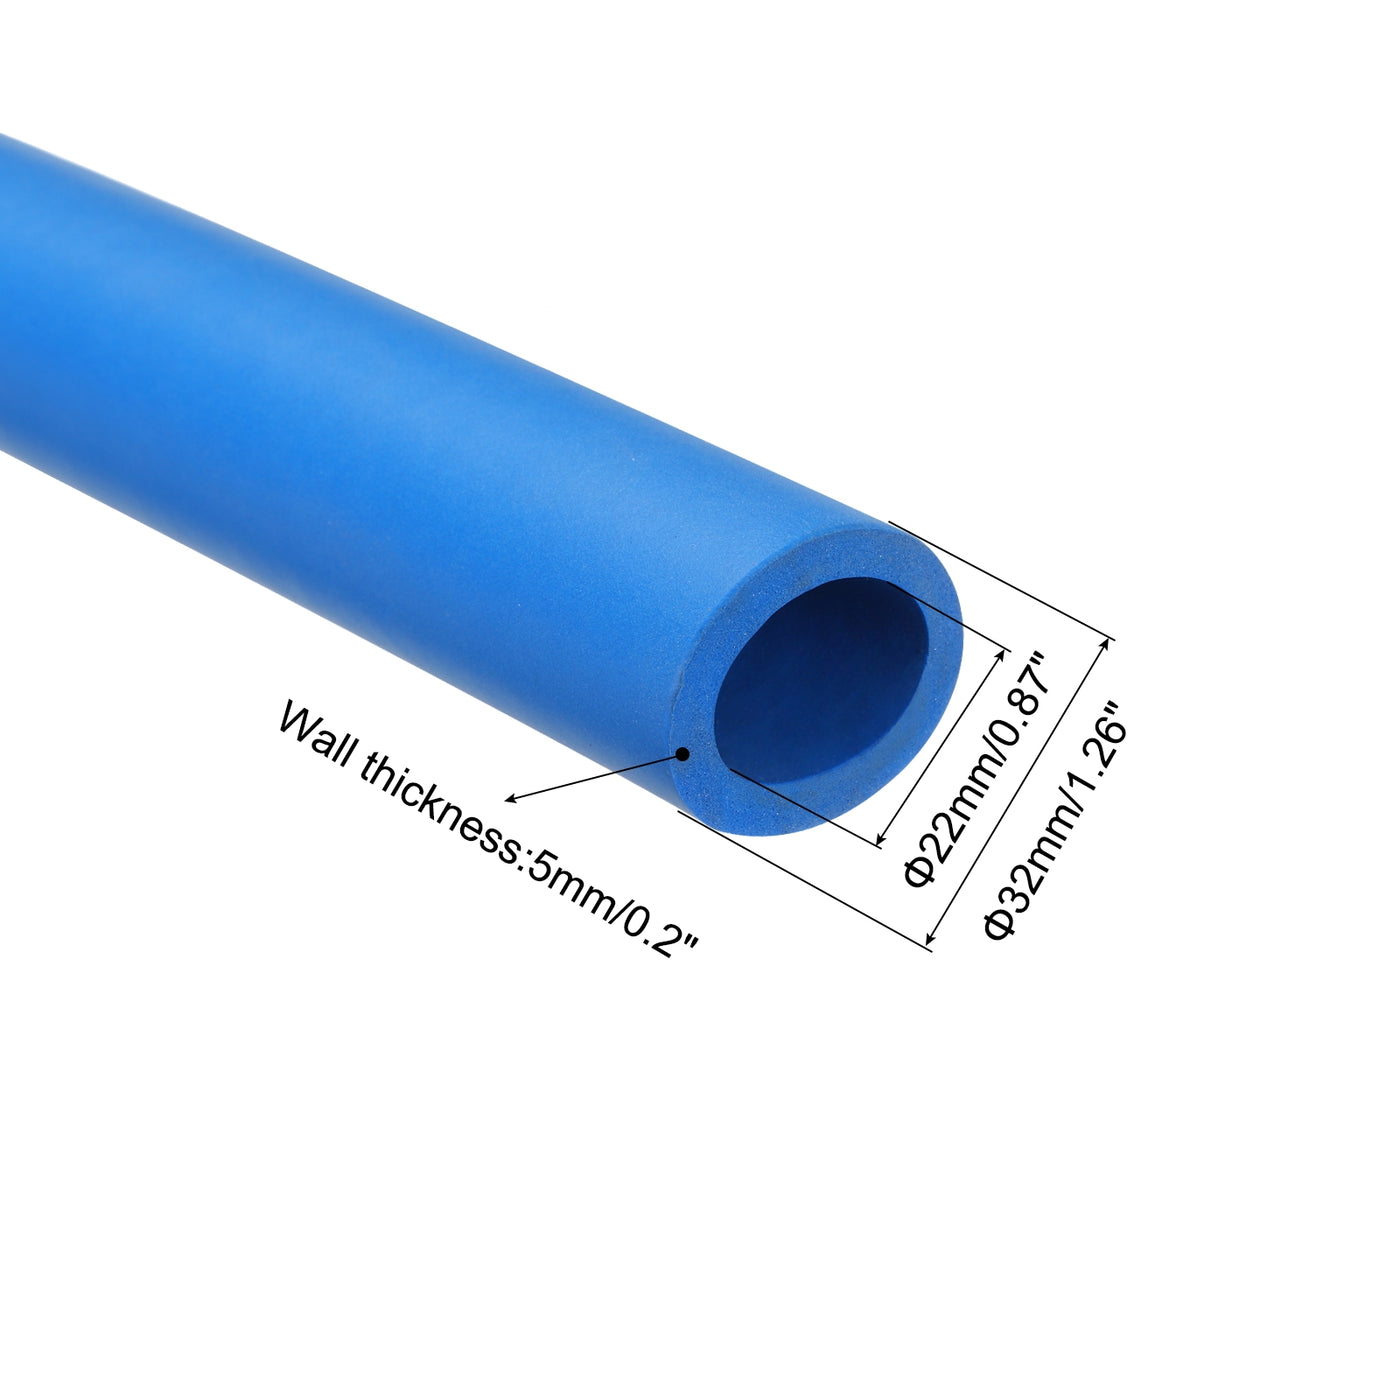 uxcell Uxcell 2pcs 3.3ft Pipe Insulation Tube 7/8 Inch(22mm) ID 32mm OD Foam Tubing for Handle Grip Support, Blue